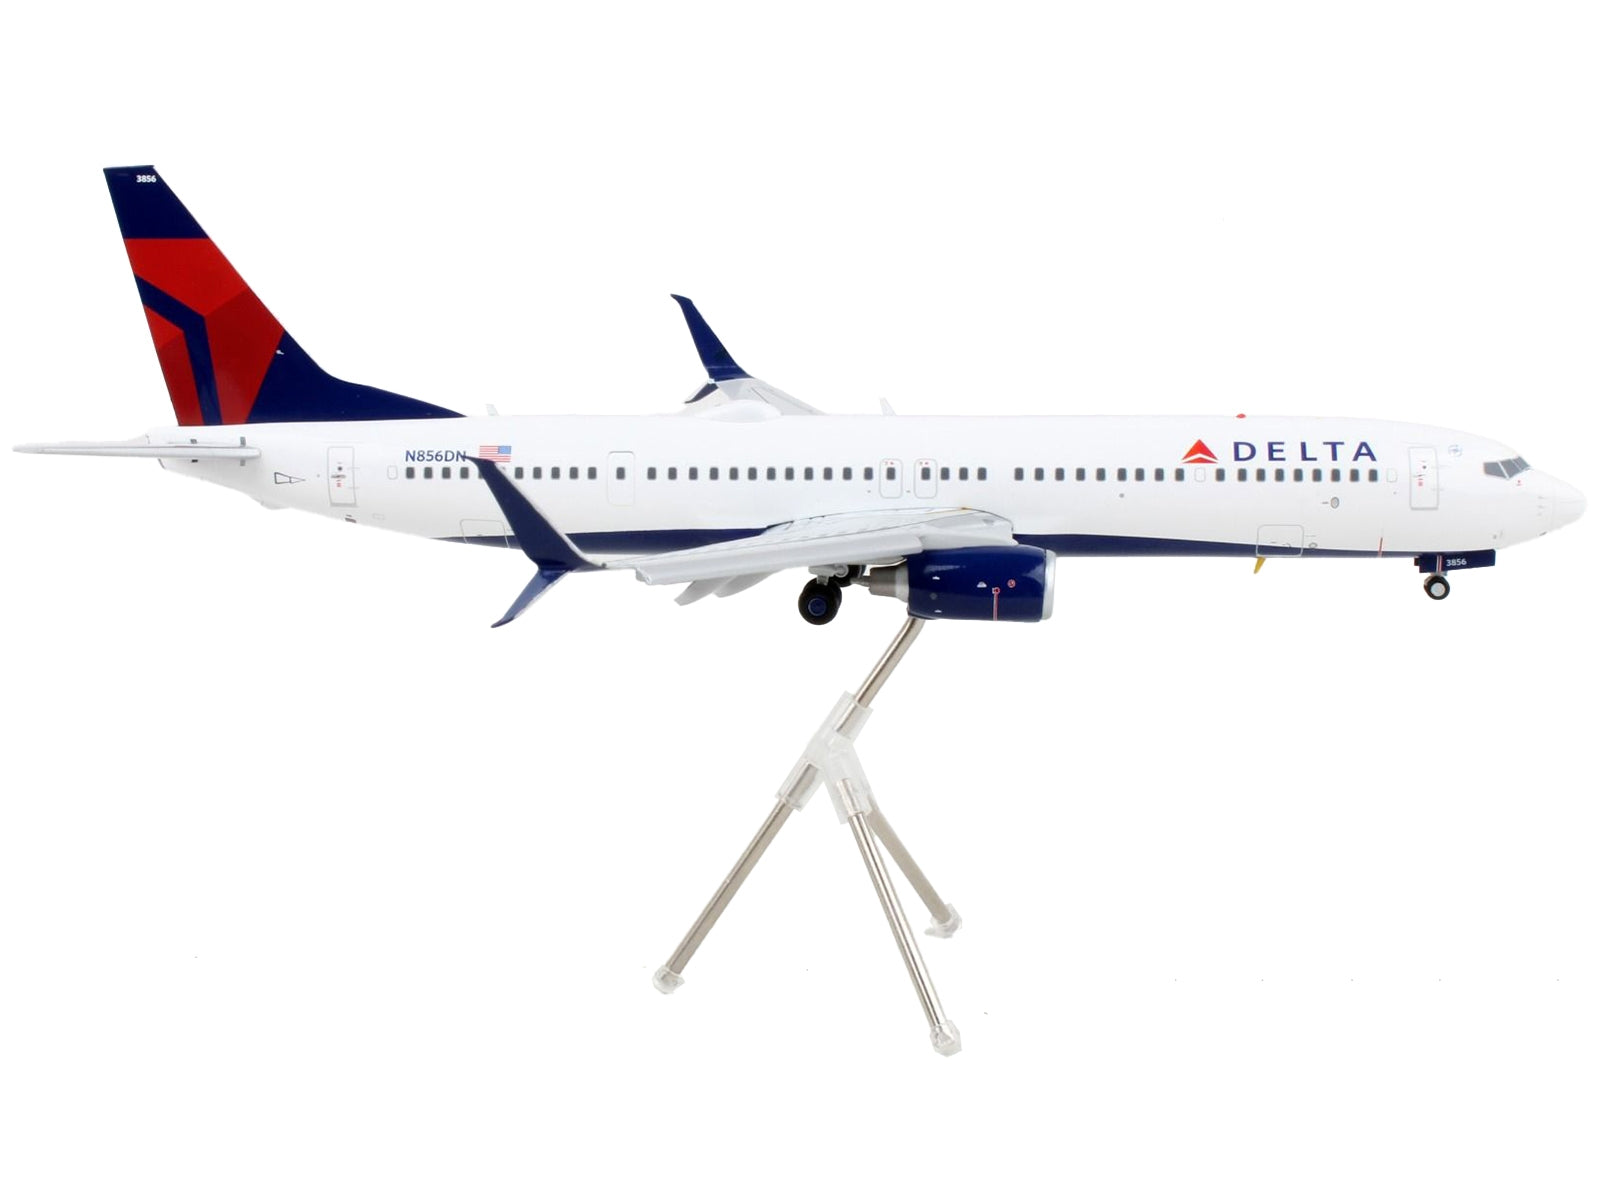 GeminiJets 1/200 Diecast: Boeing 737-900ER "Delta Air Lines" White/Blue/Red Tail with Flaps Down